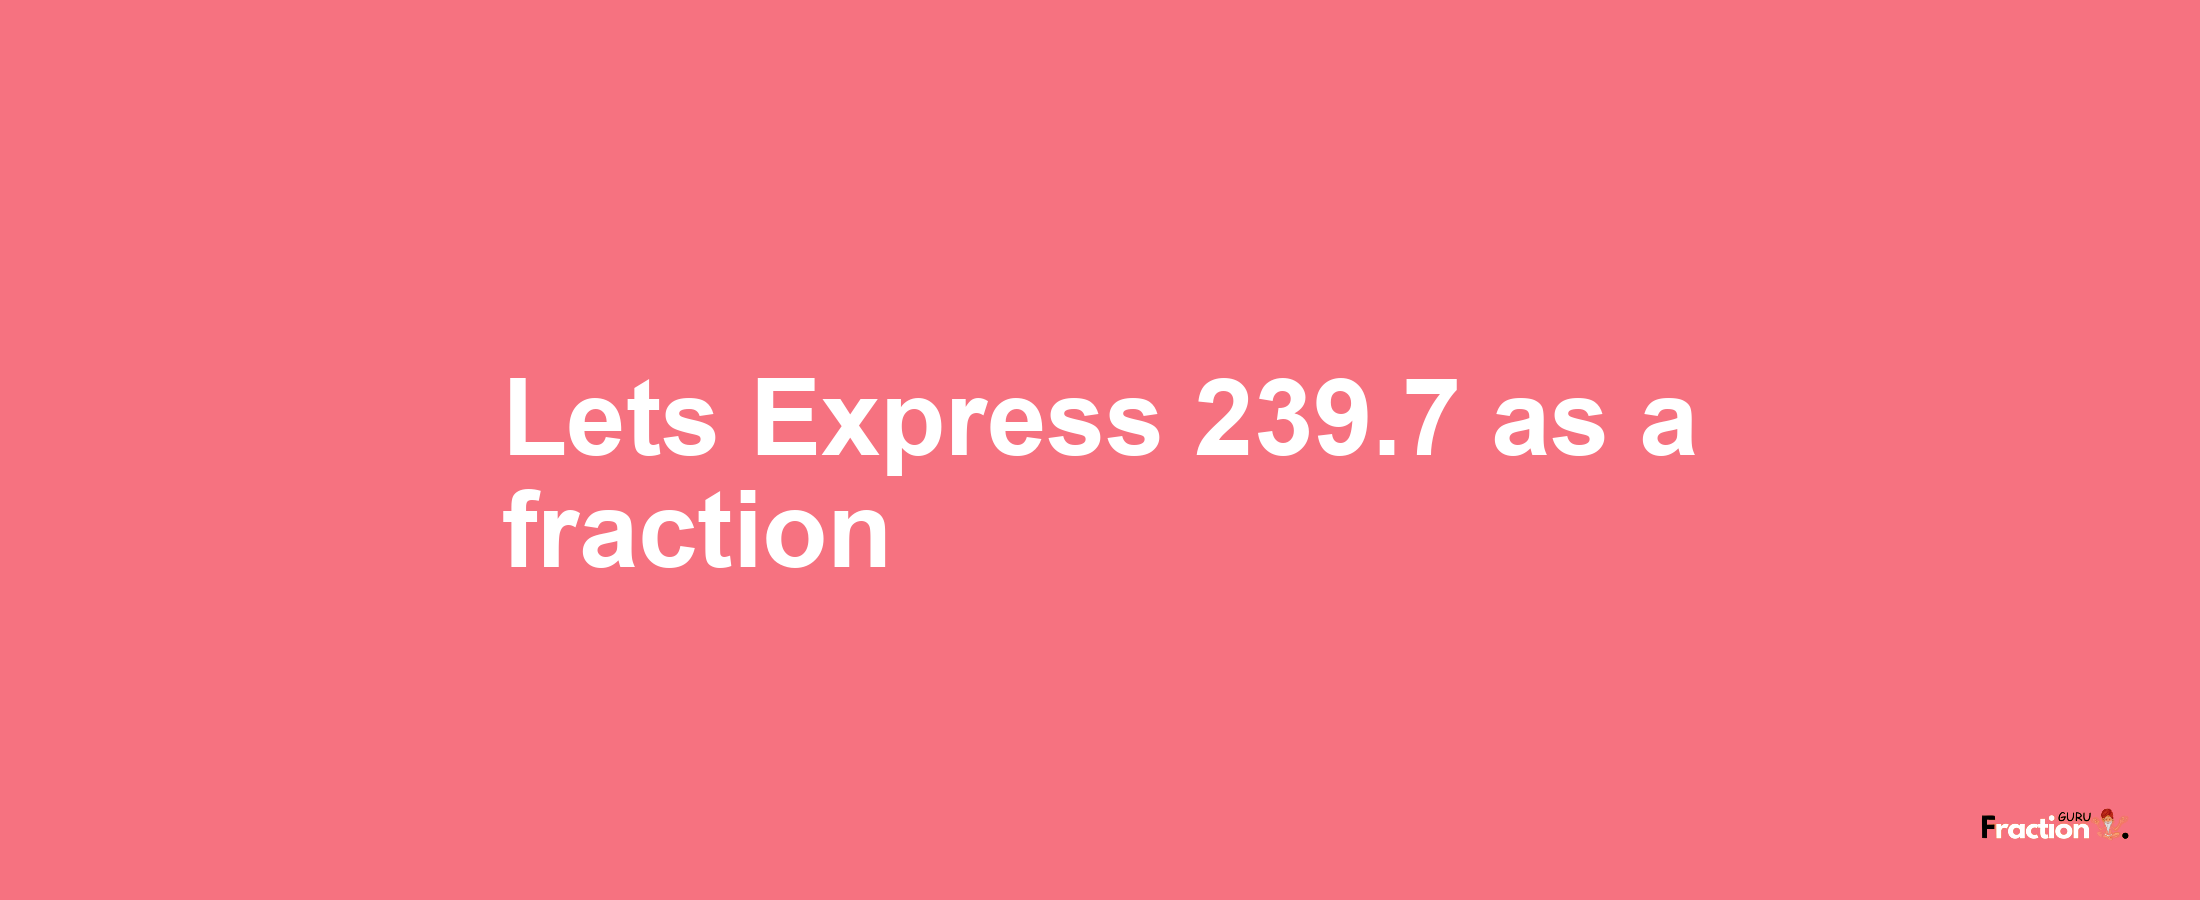 Lets Express 239.7 as afraction